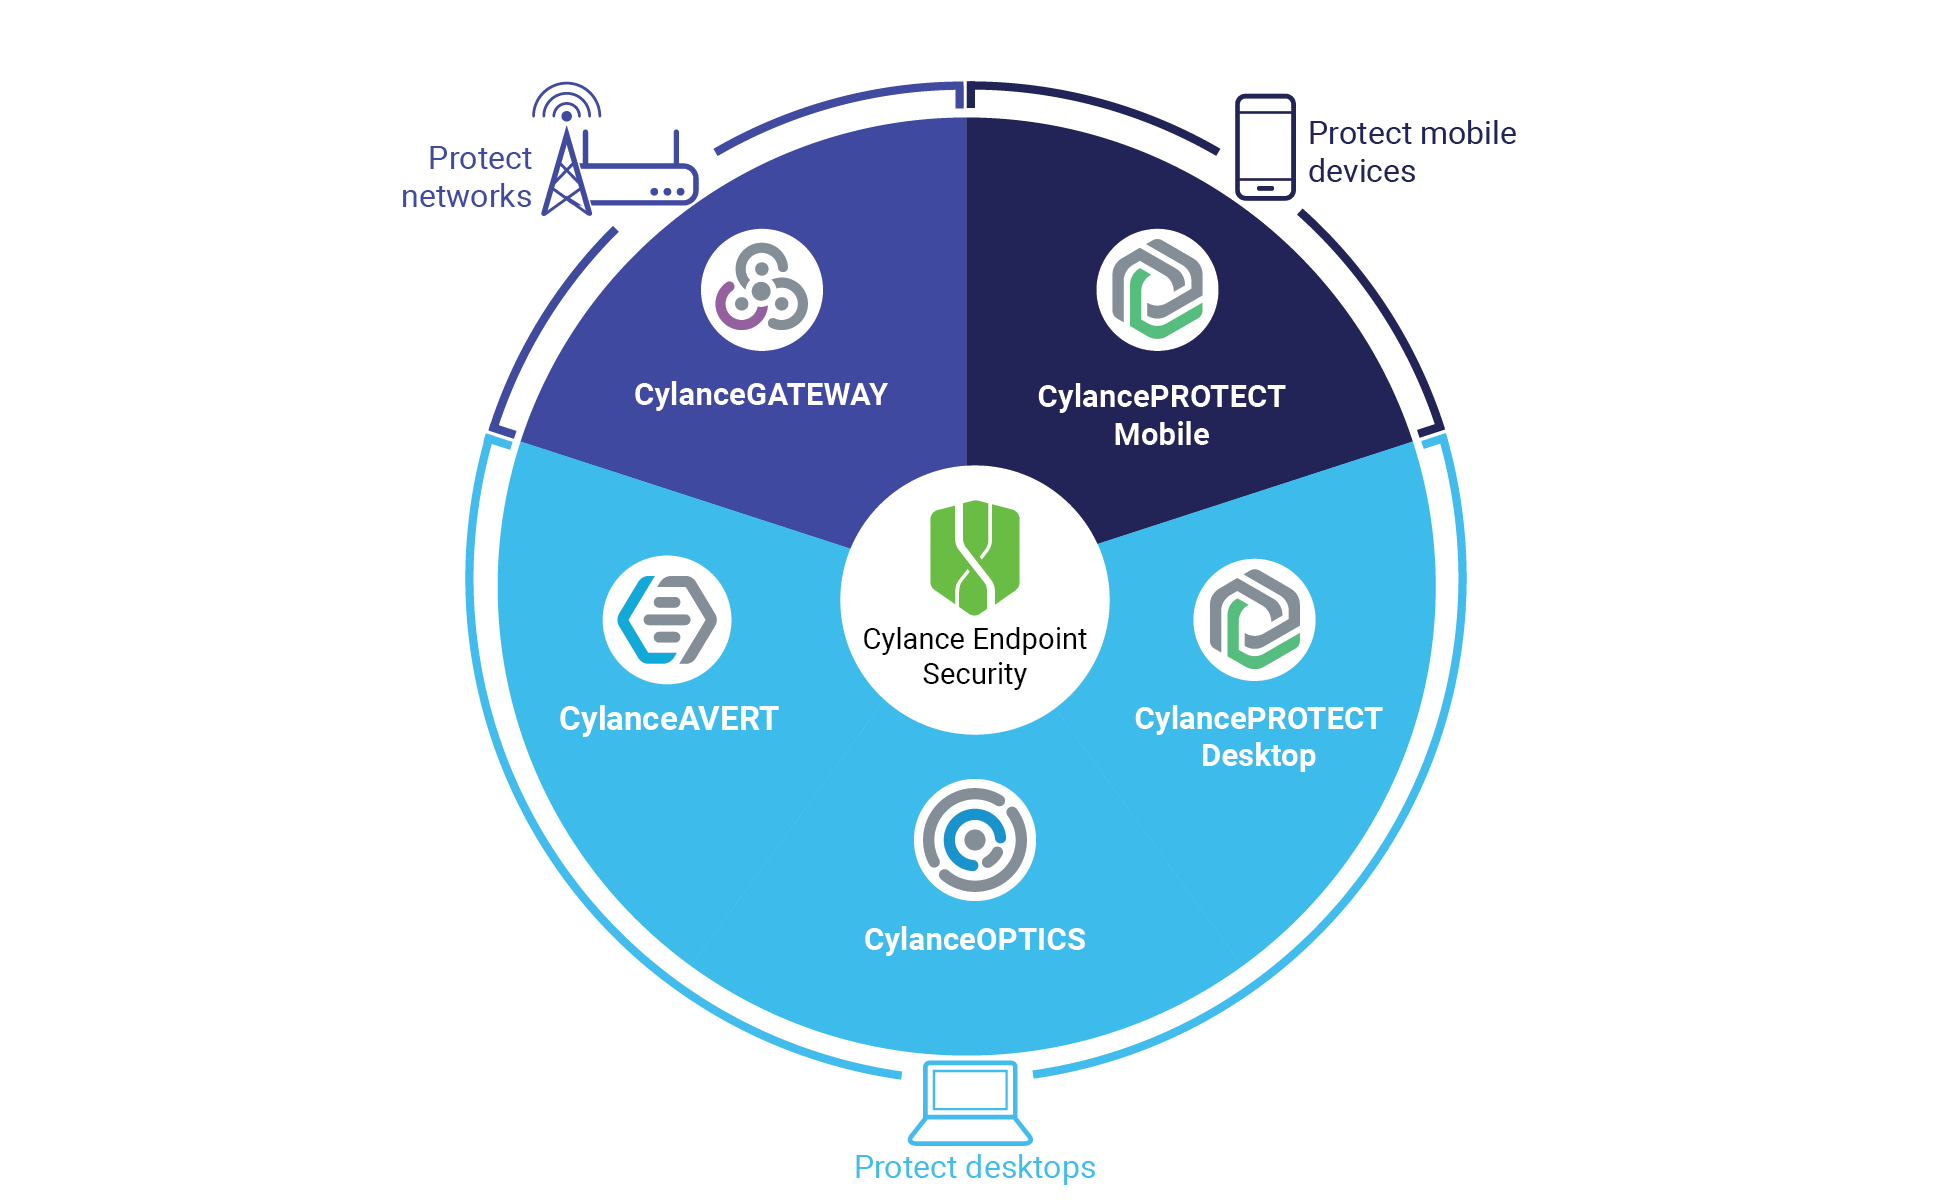 The cybersecurity services of the Cylance Endpoint Security platform